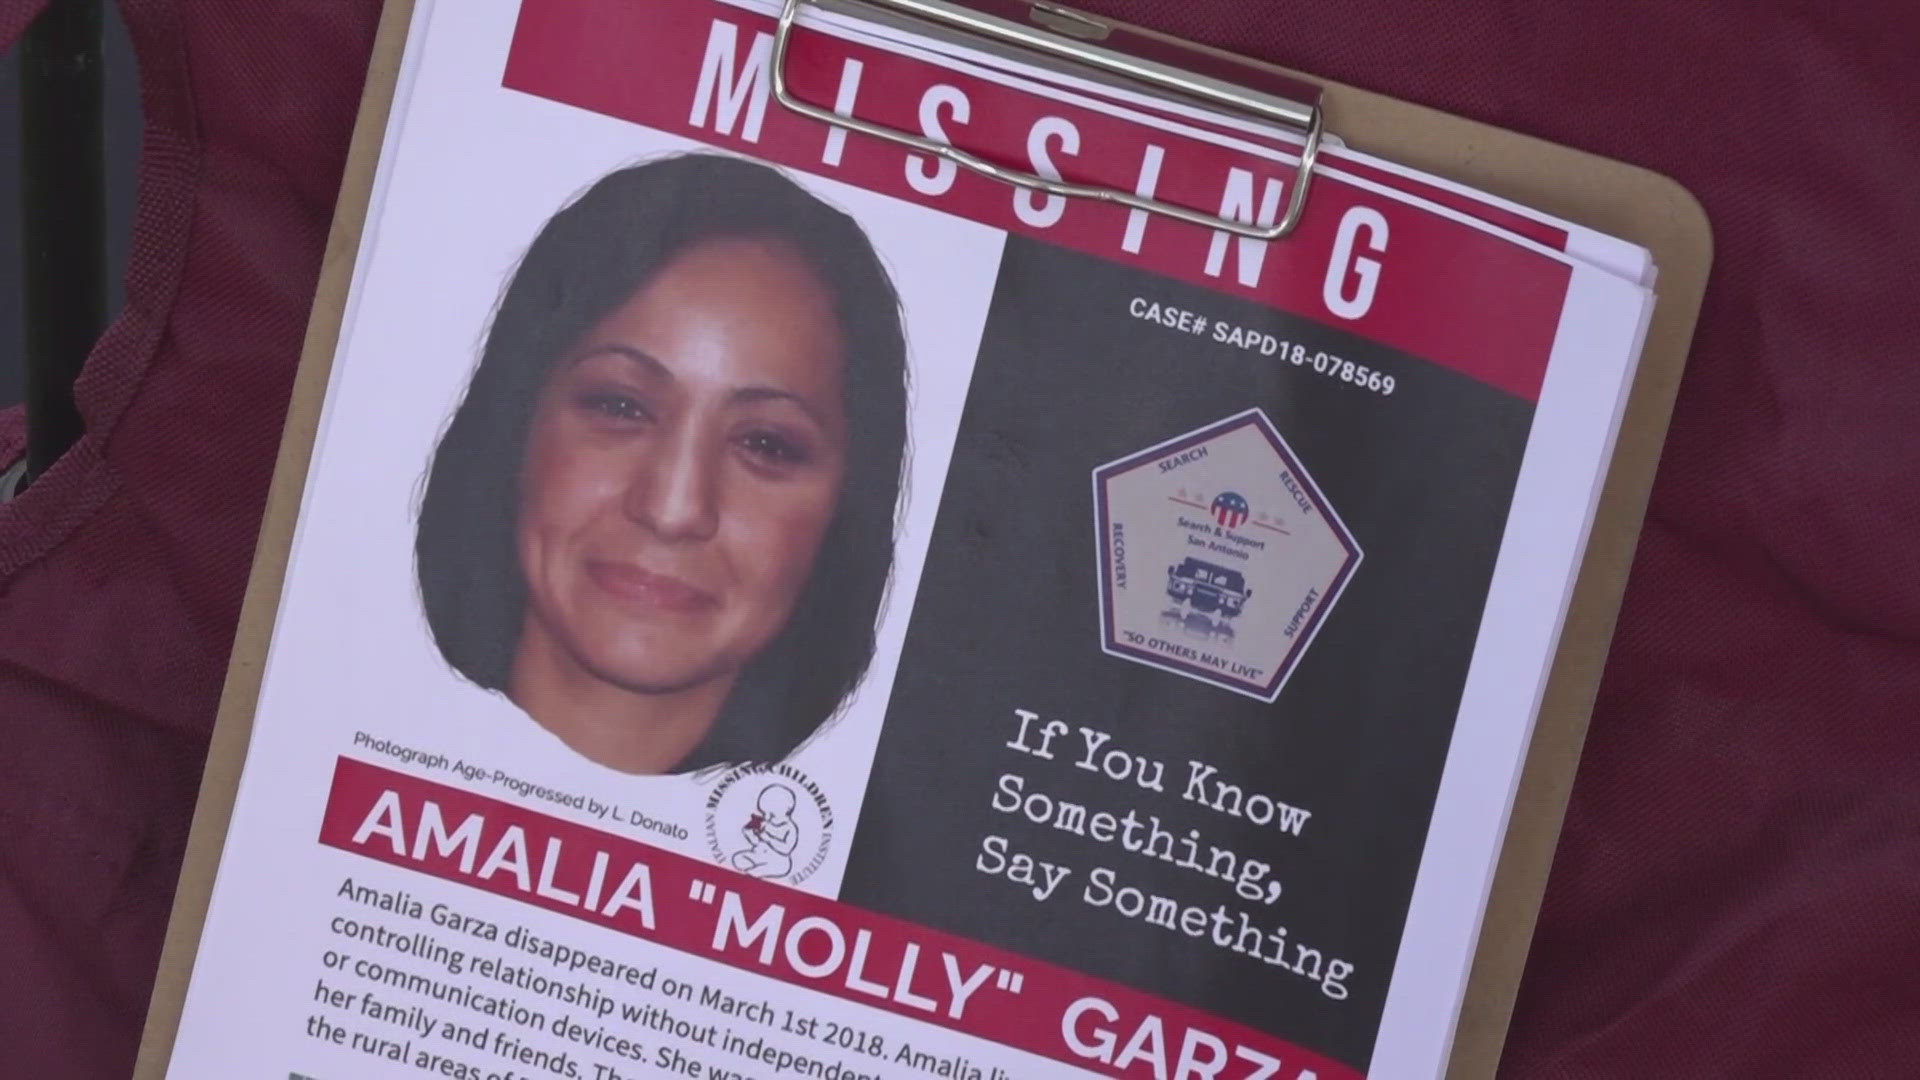 The family gathered at the last known location of Amalia "Molly" Garza on her birthday to hand out flyers.